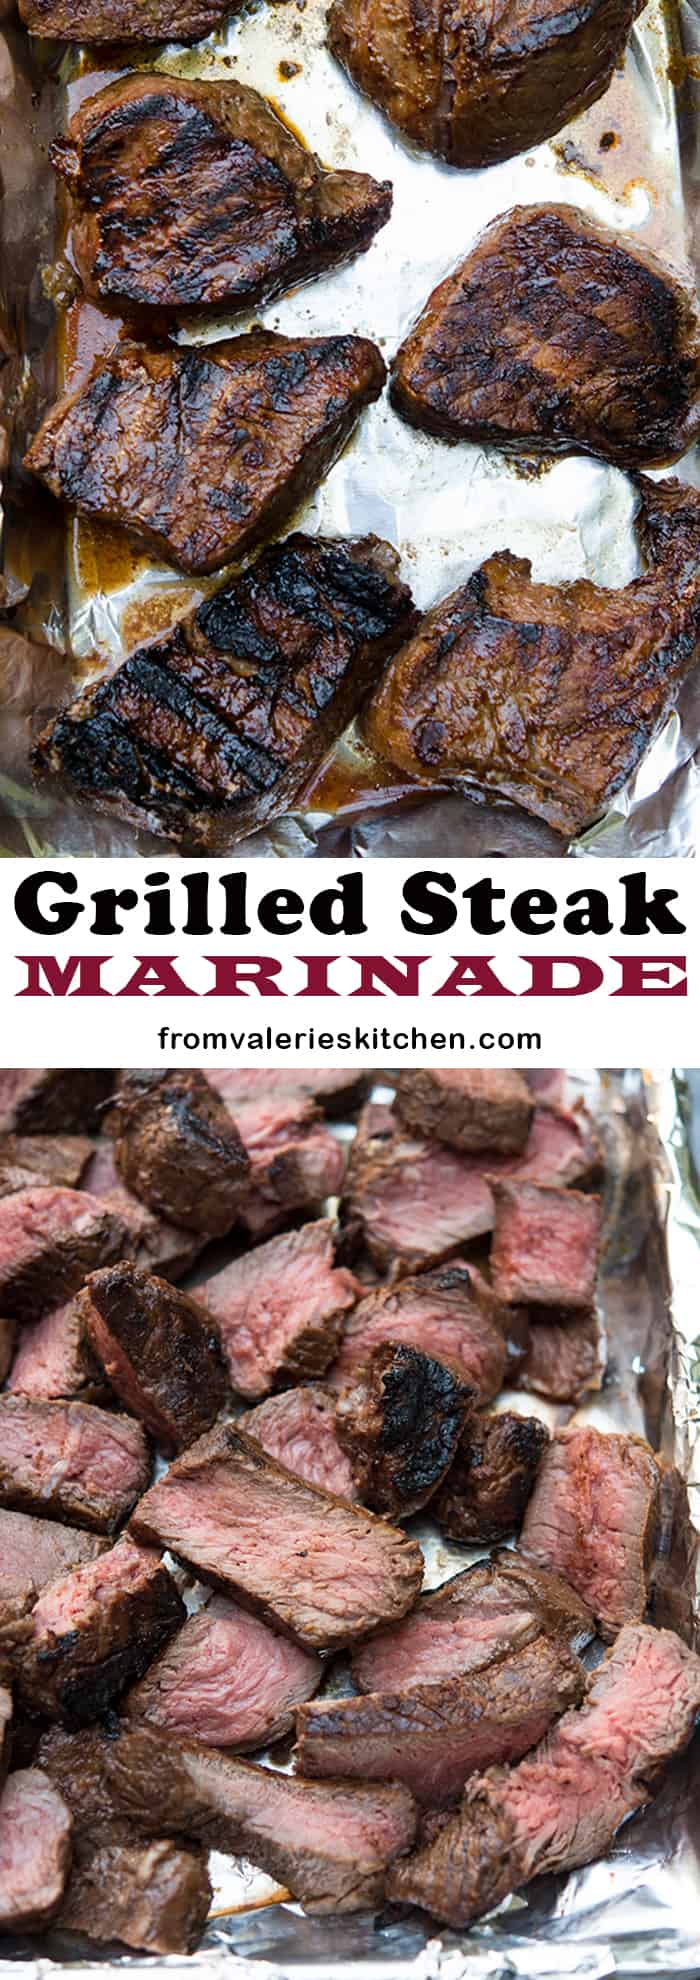 A two image vertical collage of Grilled Steak Marinade with text overlay.